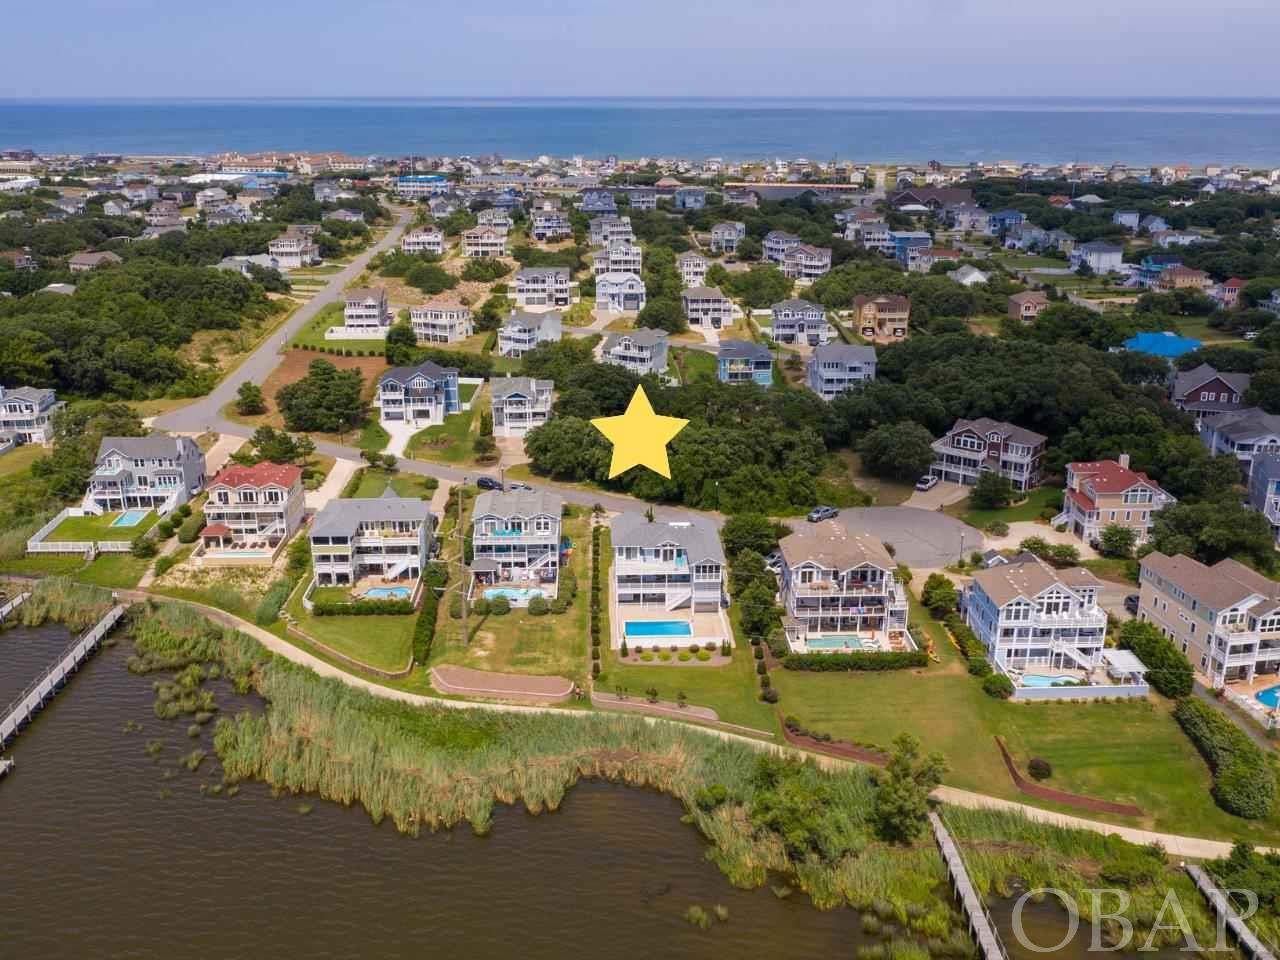 Ready to build your dream home with views galore?  Watch stunning sunsets over the sound from this beautiful semi-soundfront homesite, located in one of the most prestigious and sought after neighborhoods on the Outer Banks. Situated on a quiet cul-de-sac and just across the street from the community pier, kayak launch, and multi-use path, this property offers all you need to get settled into the coastal lifestyle.  First Flight Ridge is a private, gated community centrally located in the heart of Kitty Hawk within a quick walk or bike ride to numerous shops, restaurants and the beautiful Kitty Hawk beaches. The community backs to Kitty Hawk Bay and the Kitty Hawk multipurpose path perfect for walking, biking, running, you name it! The soundside community pier is a perfect spot where you will often find neighbors gathering to watch the sunset. The pier also has a launch platform ideal for dropping in kayaks and paddle boards. This location is just waiting for your dream home!